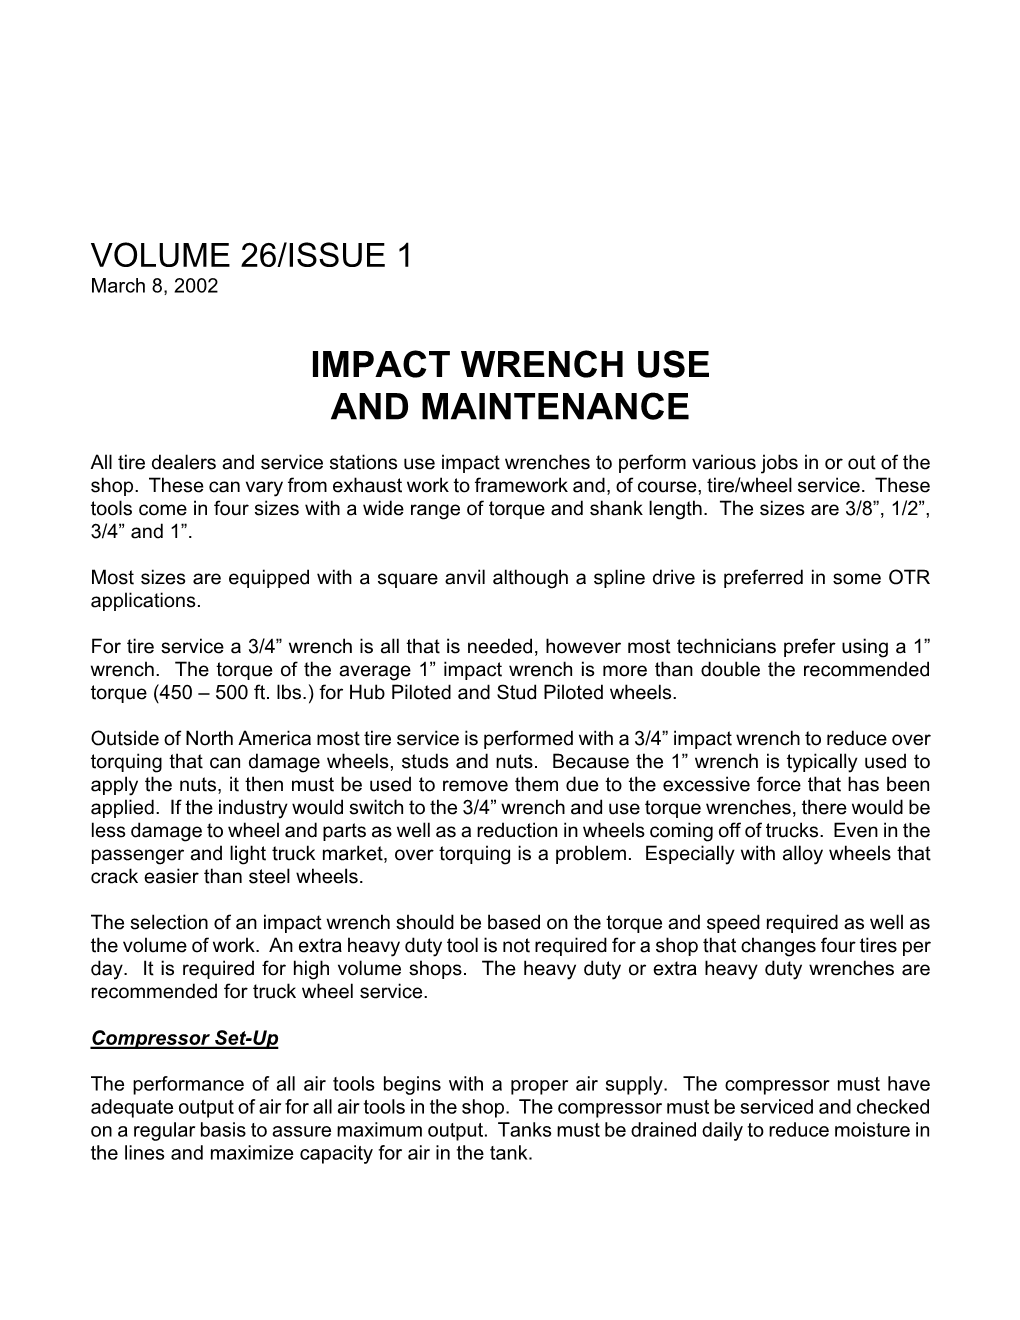 Impact Wrench Use and Maintenance